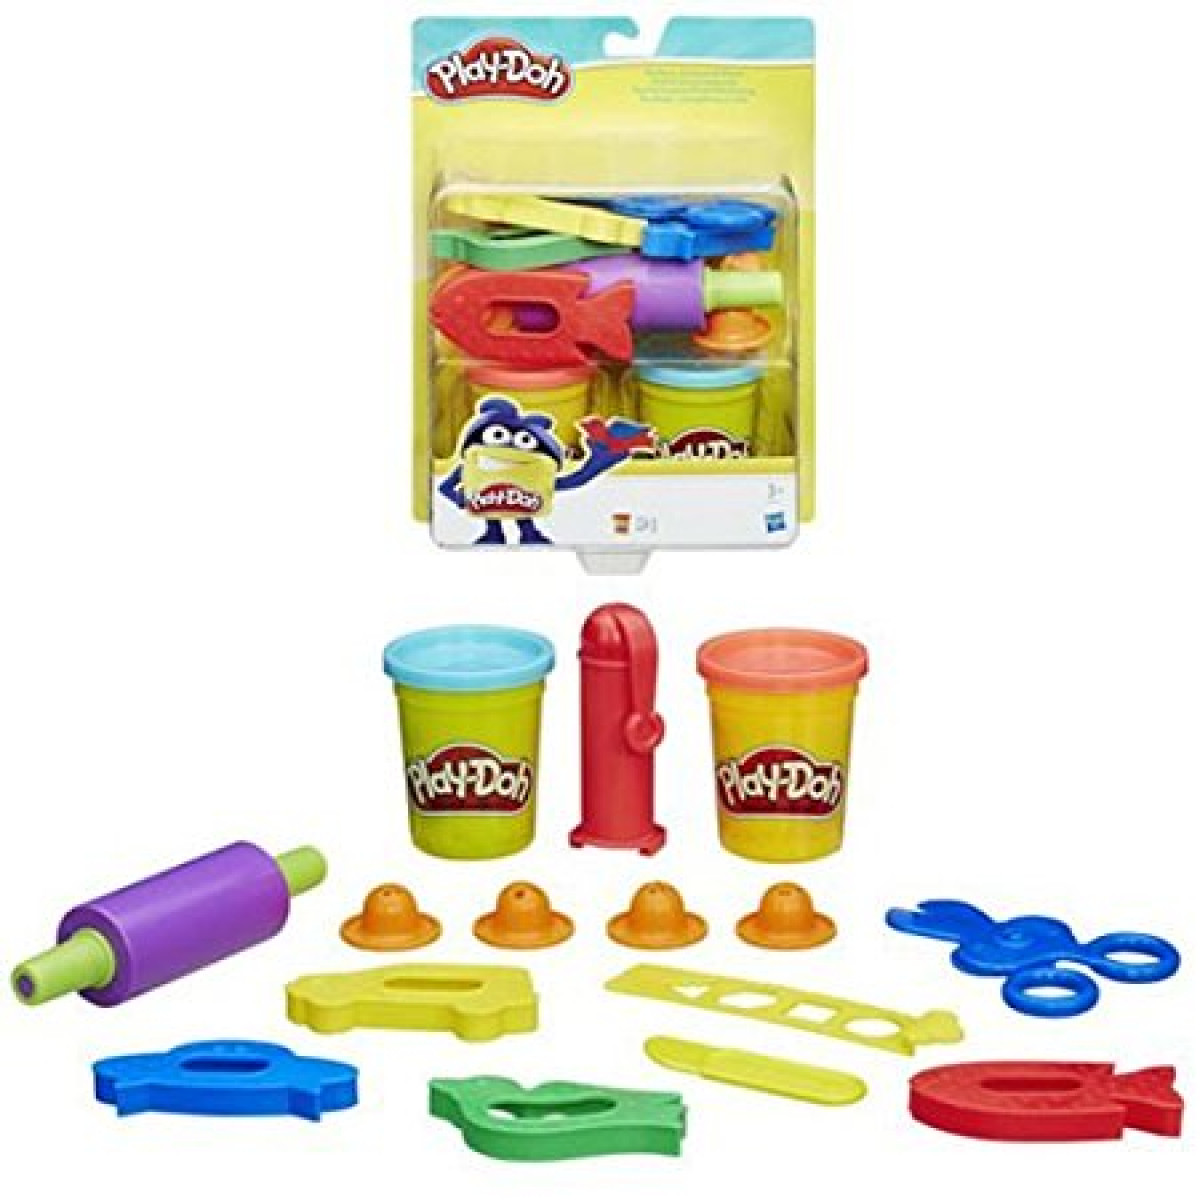 Play Doh Rollers and Cutters Toy